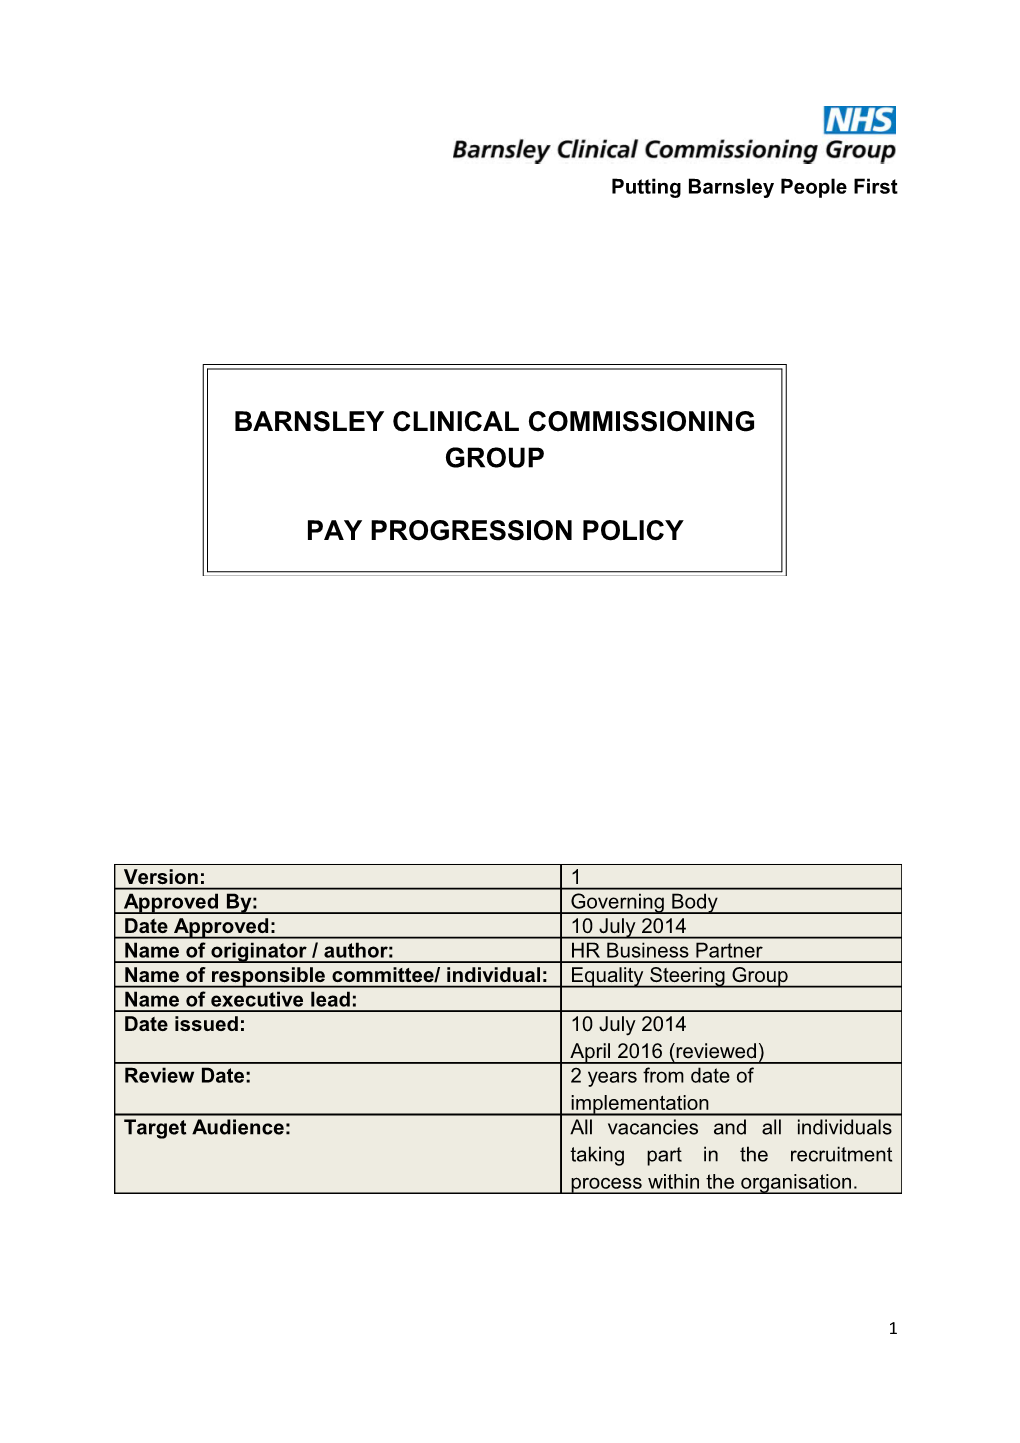 Barnsley Clinical Commissioning Group Pay Progression Policy